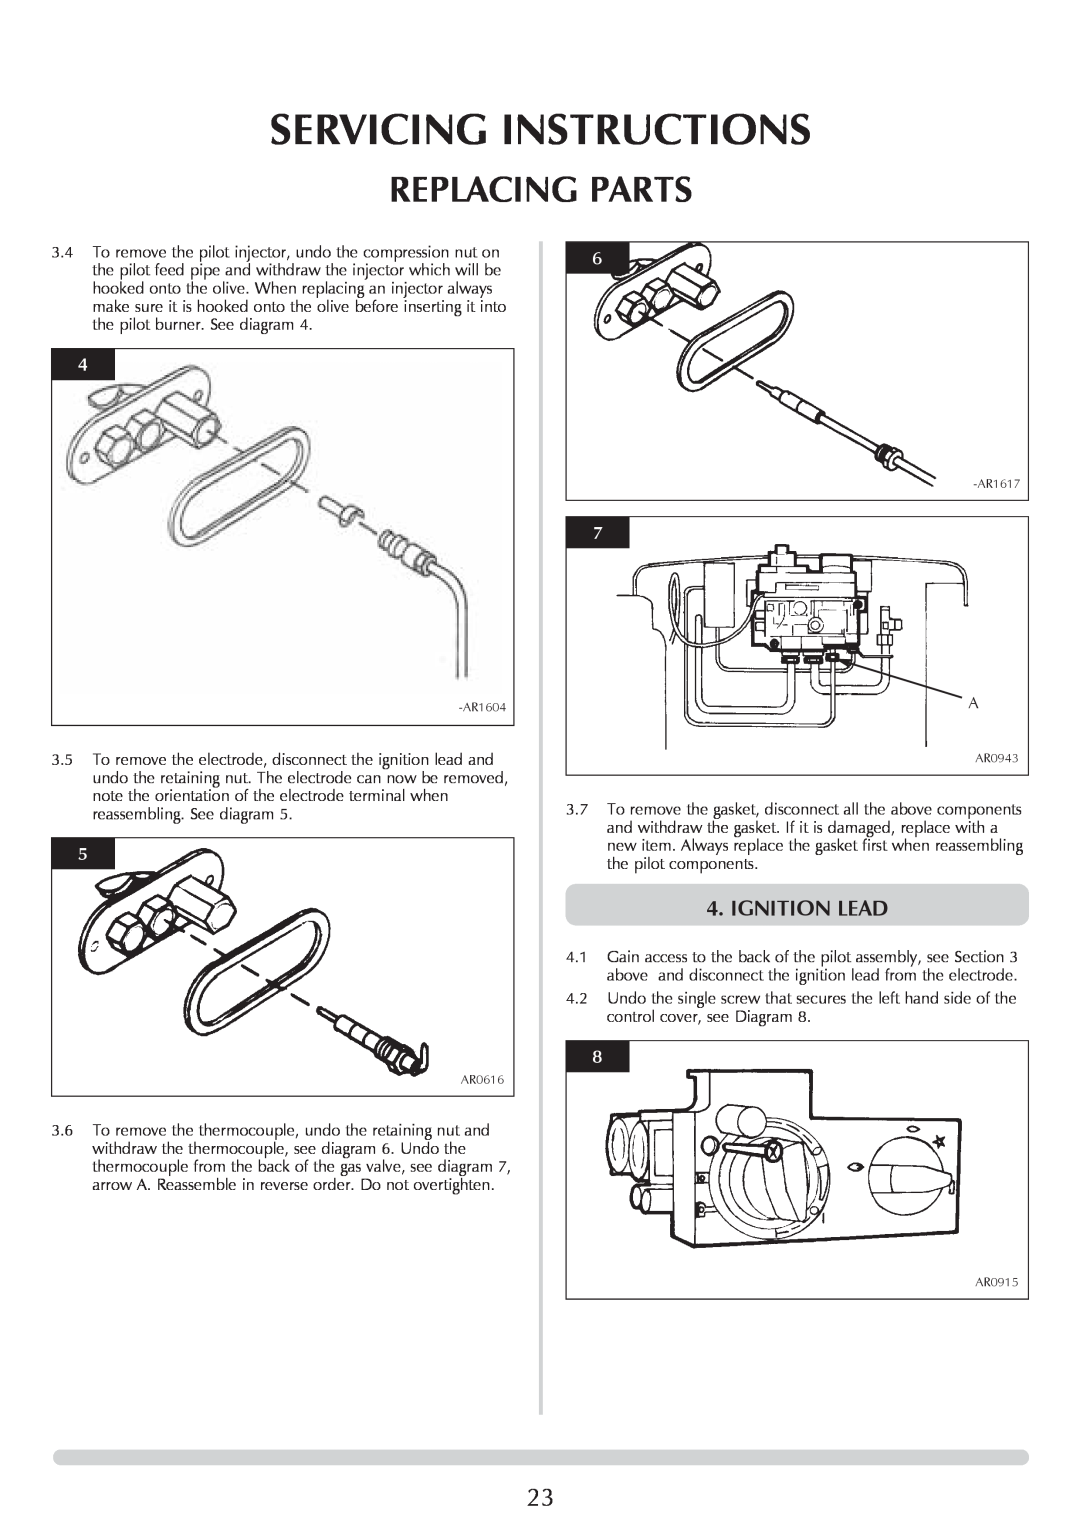 Stovax Ceramica Manhattan Wood Stove manual Servicing Instructions, Replacing Parts, Ignition Lead 